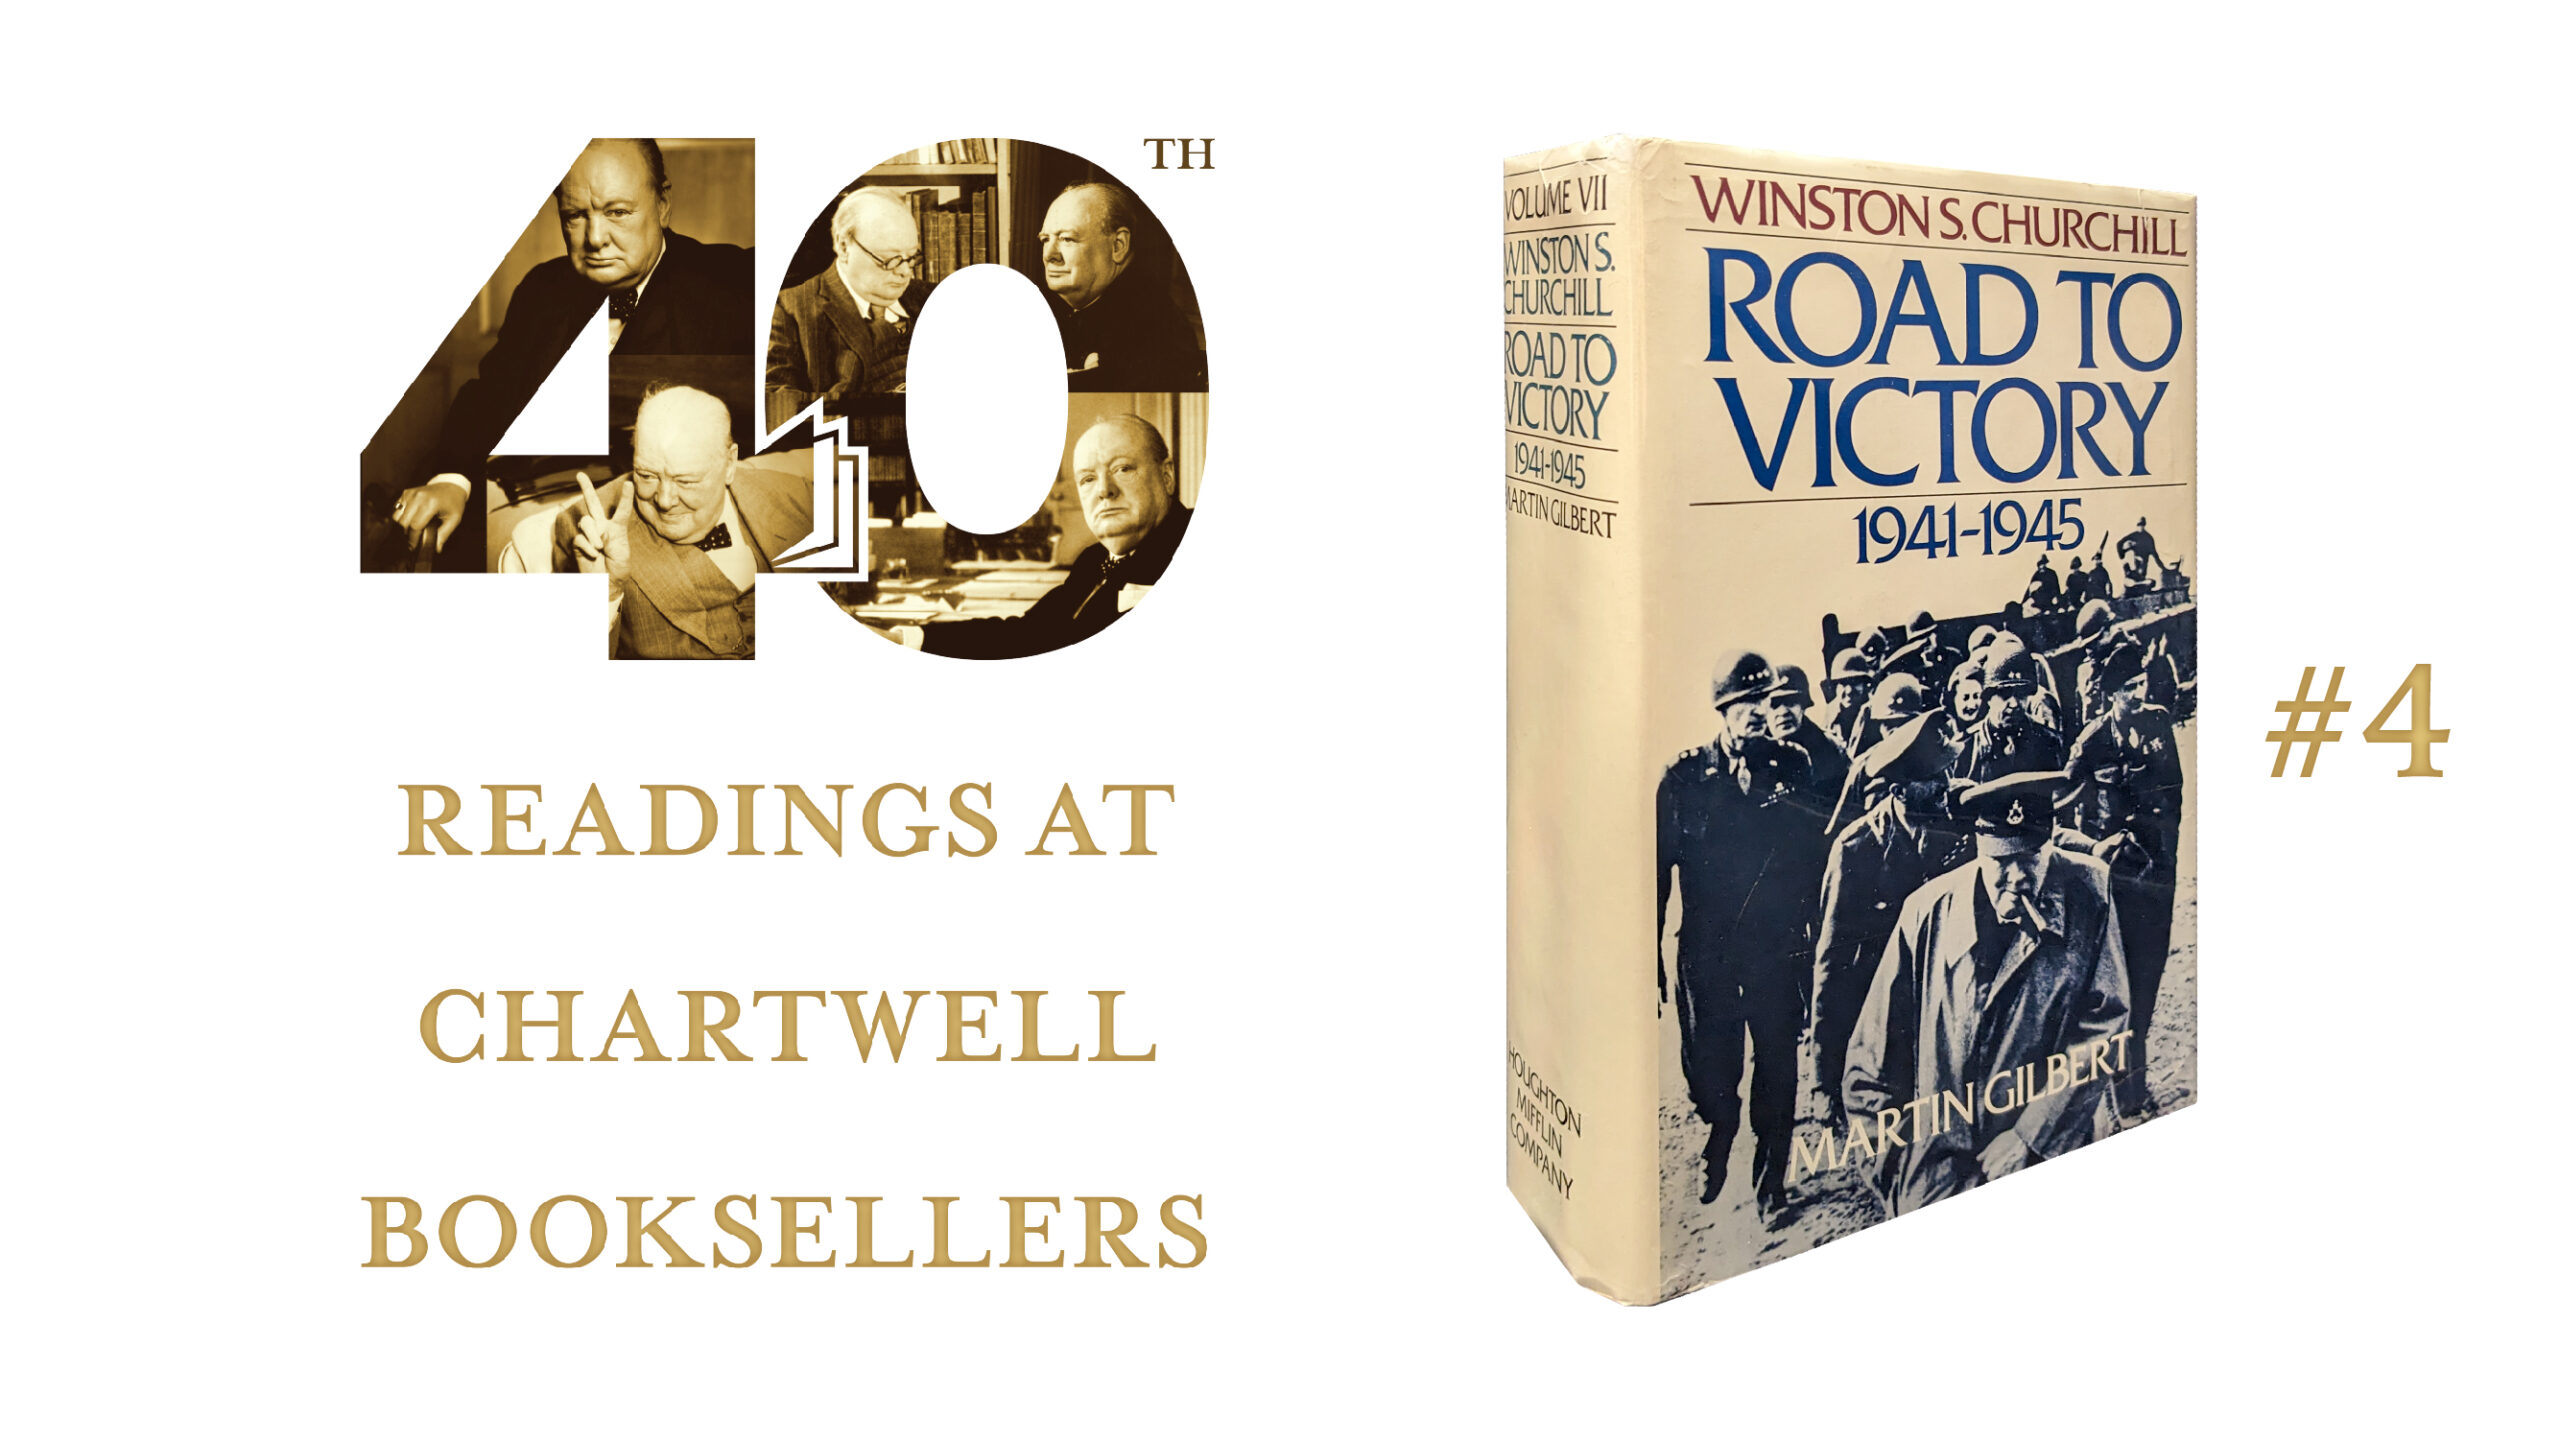 WATCH ESTHER, LADY GILBERT READ ‘ROAD TO VICTORY,’ BY SIR MARTIN GILBERT